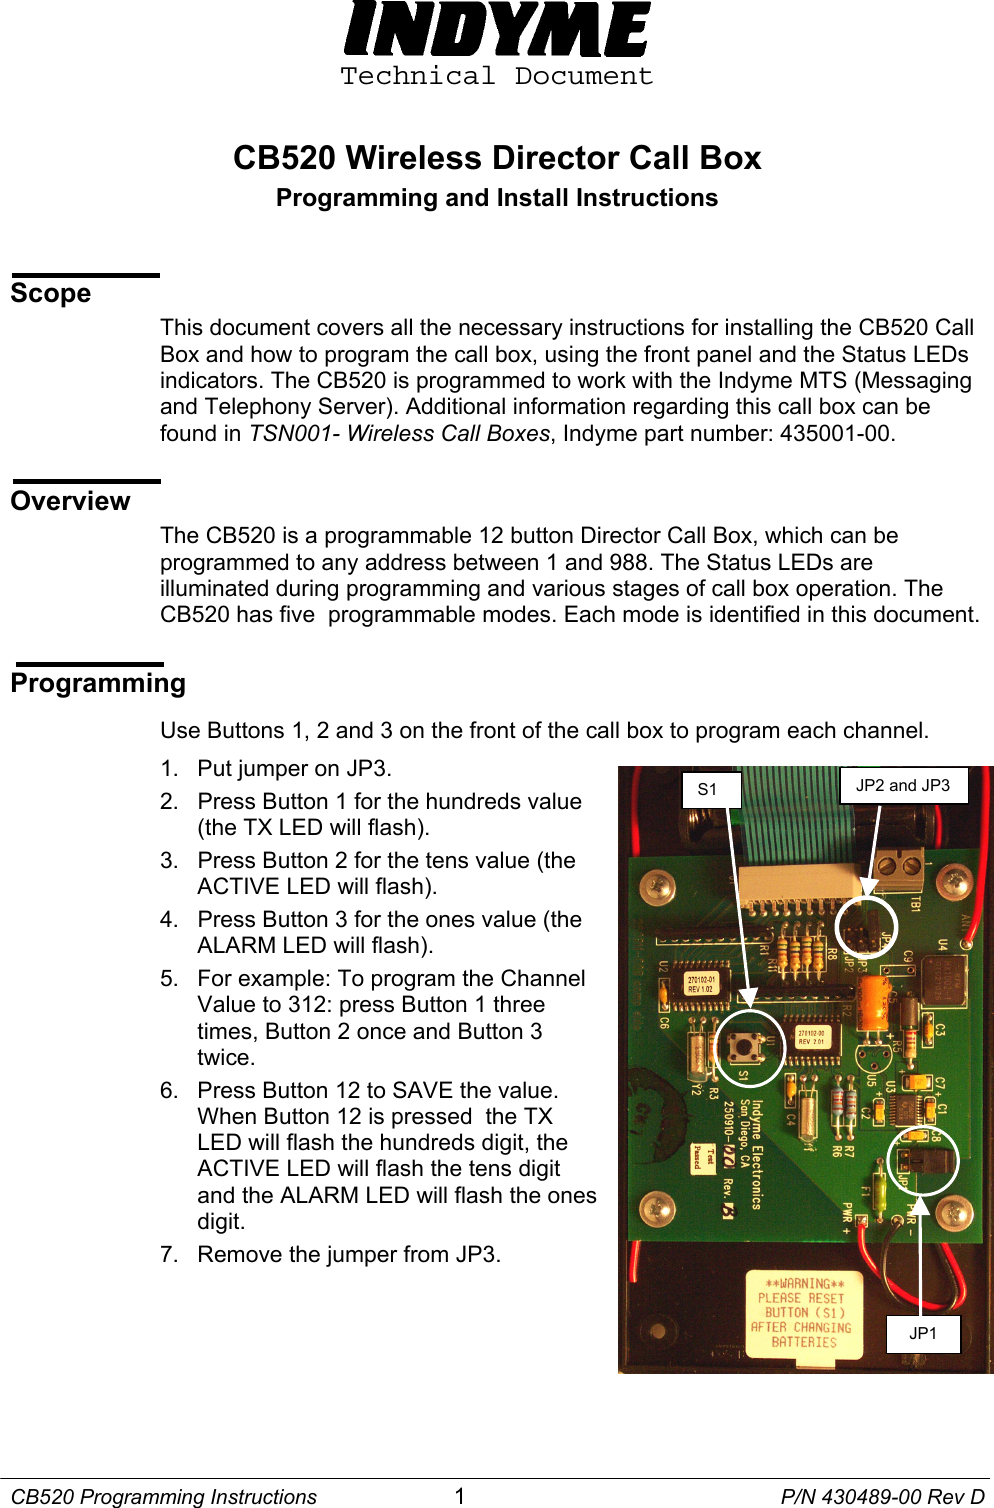  Technical Document  CB520 Wireless Director Call Box Programming and Install Instructions   Scope This document covers all the necessary instructions for installing the CB520 Call Box and how to program the call box, using the front panel and the Status LEDs indicators. The CB520 is programmed to work with the Indyme MTS (Messaging and Telephony Server). Additional information regarding this call box can be found in TSN001- Wireless Call Boxes, Indyme part number: 435001-00.  Overview The CB520 is a programmable 12 button Director Call Box, which can be programmed to any address between 1 and 988. The Status LEDs are illuminated during programming and various stages of call box operation. The CB520 has five  programmable modes. Each mode is identified in this document.   Programming  Use Buttons 1, 2 and 3 on the front of the call box to program each channel. 1.  Put jumper on JP3.  JP2 and JP3 S1 2.  Press Button 1 for the hundreds value  (the TX LED will flash). 3.  Press Button 2 for the tens value (the ACTIVE LED will flash). 4.  Press Button 3 for the ones value (the ALARM LED will flash). 5.  For example: To program the Channel Value to 312: press Button 1 three times, Button 2 once and Button 3 twice. 6.  Press Button 12 to SAVE the value. When Button 12 is pressed  the TX LED will flash the hundreds digit, the ACTIVE LED will flash the tens digit and the ALARM LED will flash the ones digit. JP1 7.  Remove the jumper from JP3.   CB520 Programming Instructions  1  P/N 430489-00 Rev D 